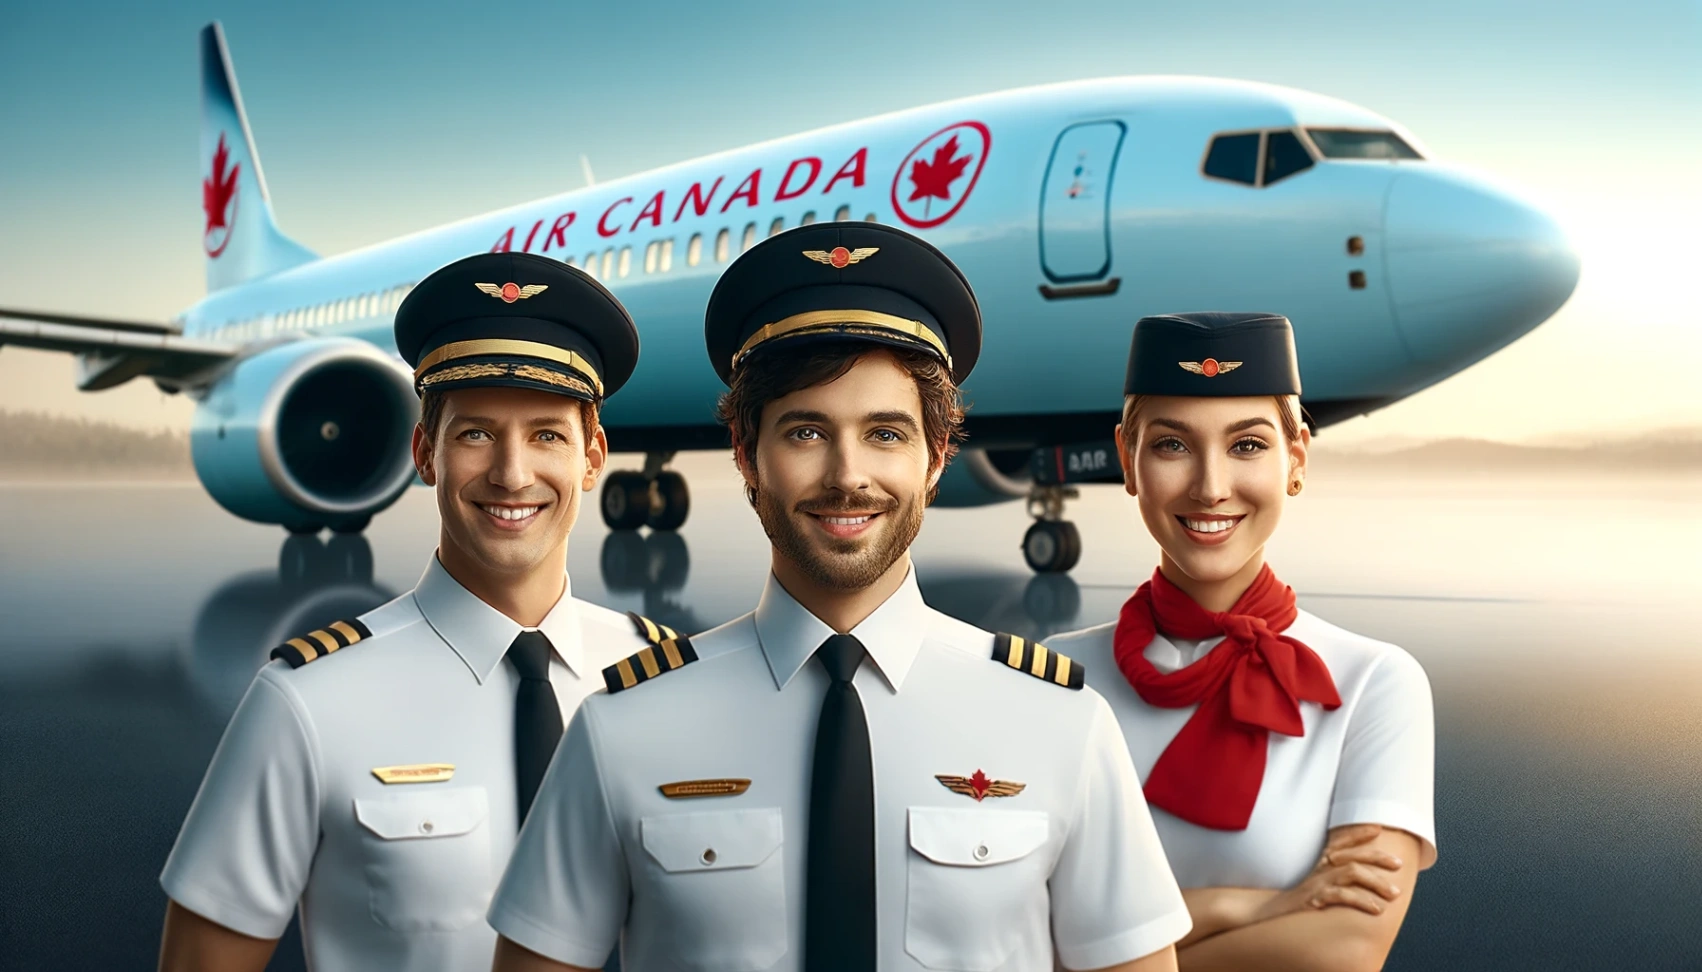 Air Canada Job Openings: How to Apply